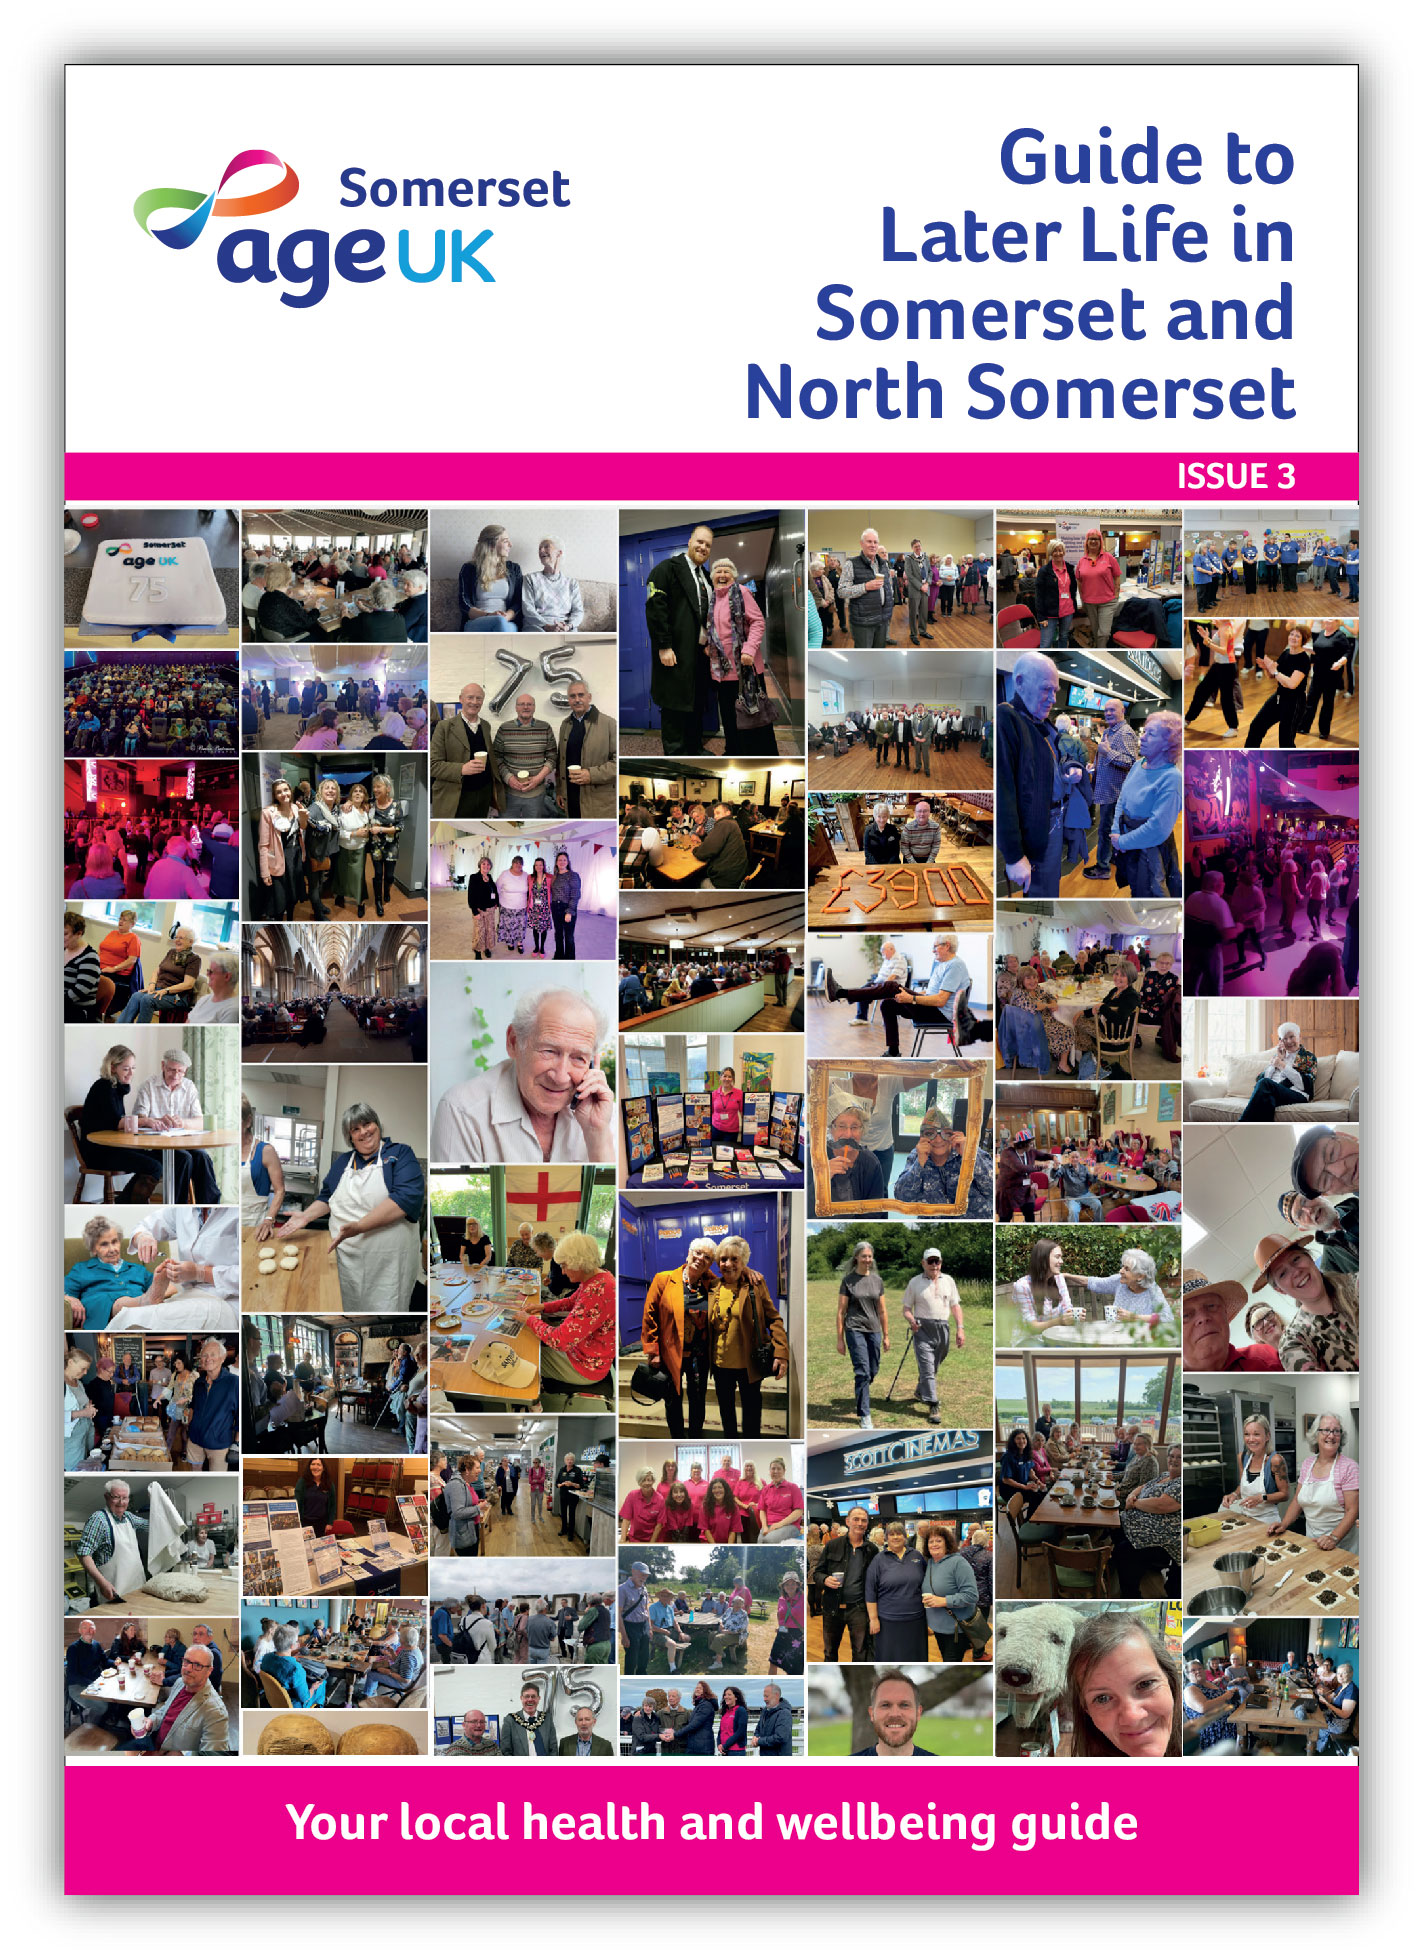 Guide to Later Life in Somerset image